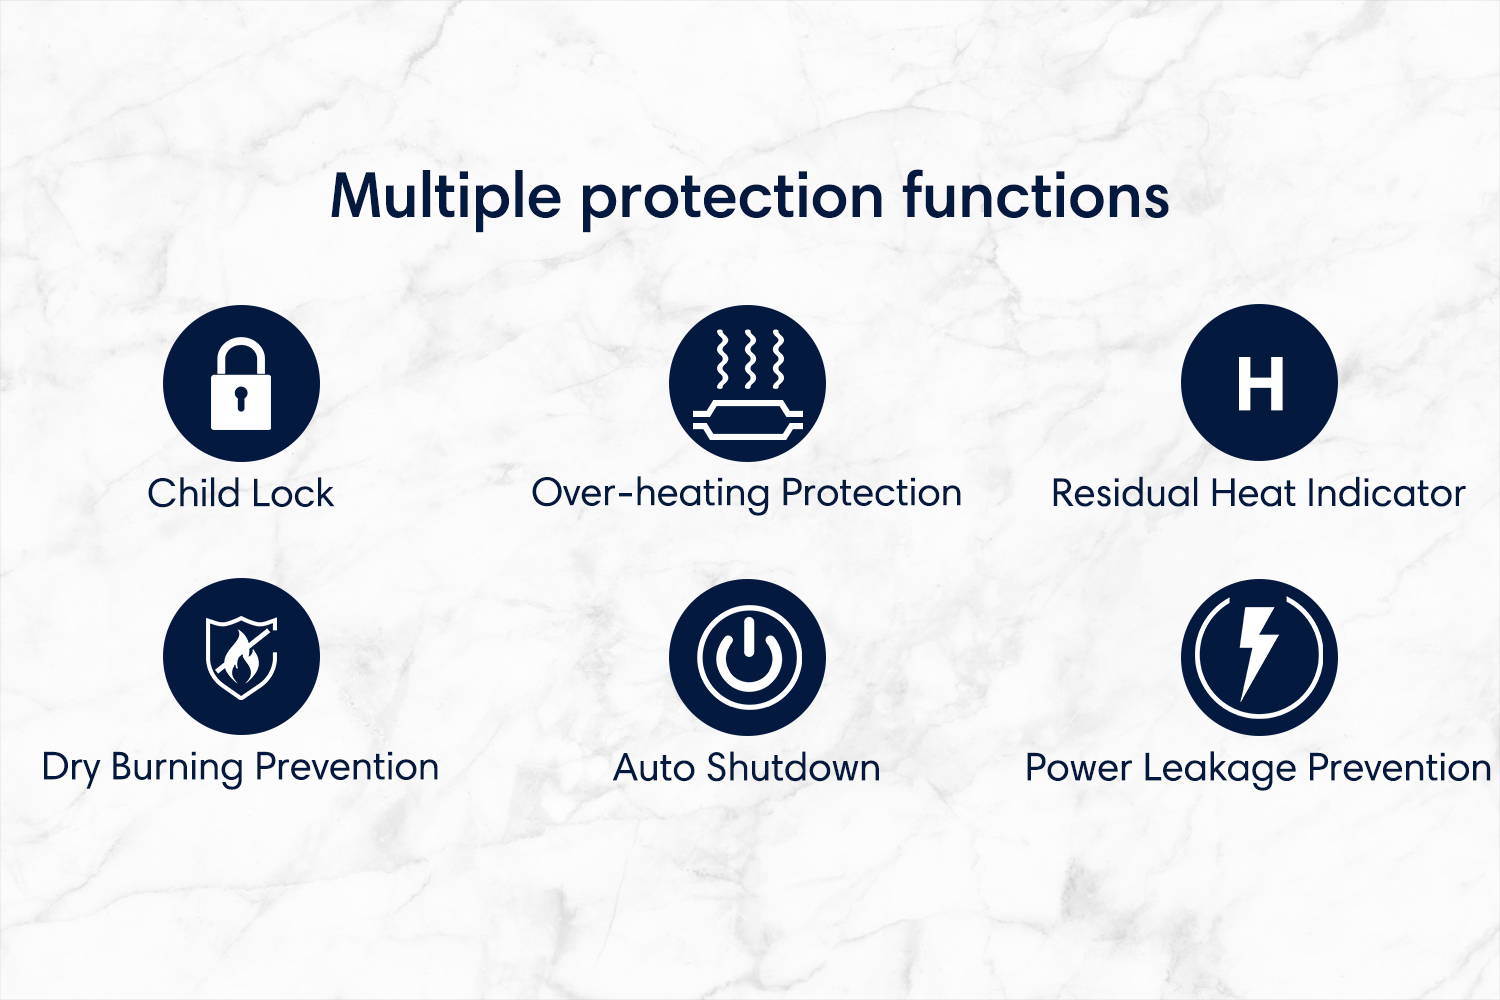 Multiple protection functions Child lock over-heating protection residual heat indicator dry burning prevention auto shutdown power leakage prevention